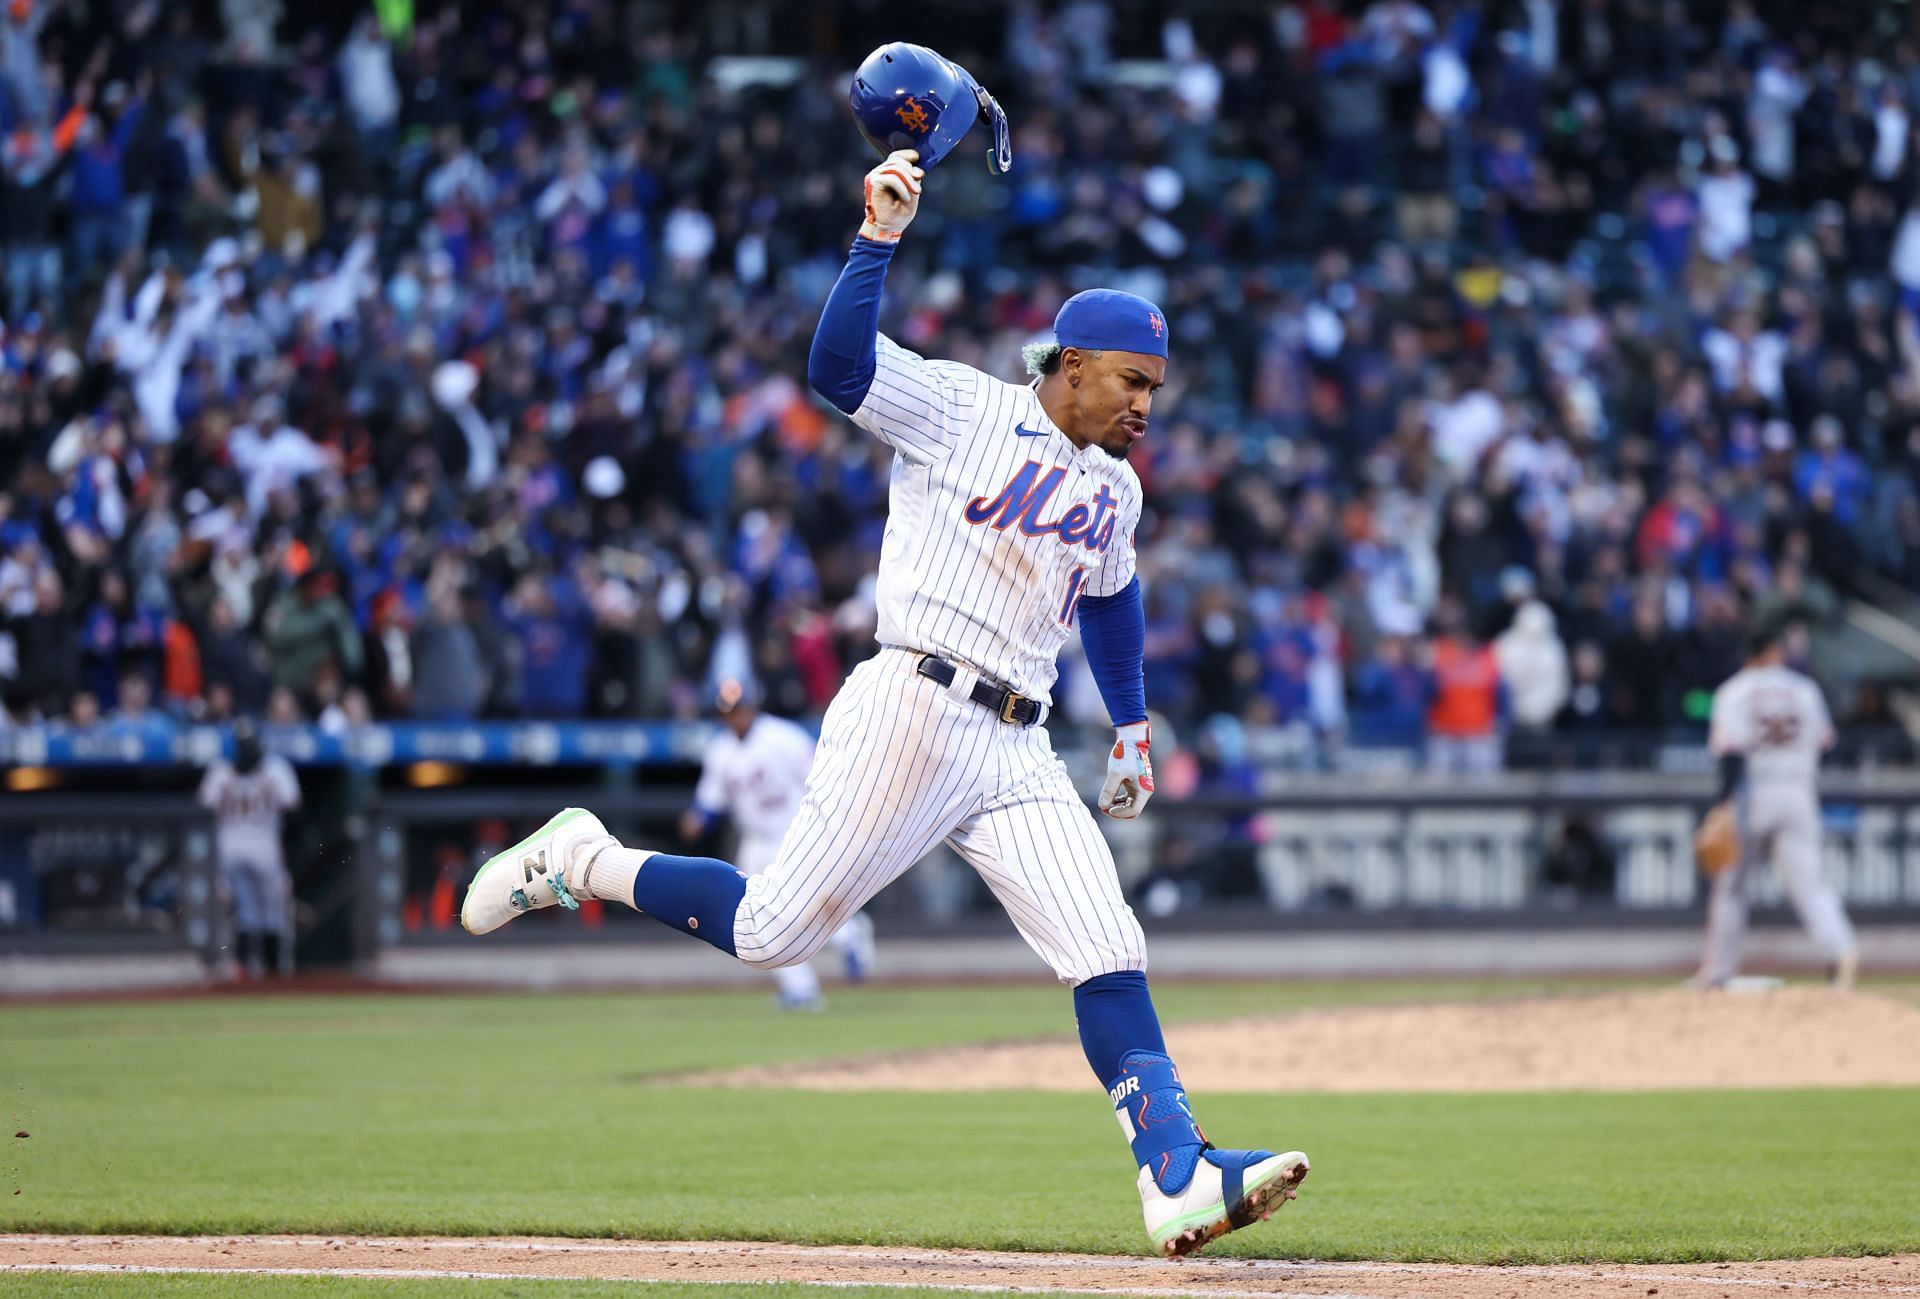 It has been all smiles lately for the New York Mets and Francisco Lindor, who followed his walk-off single on Wednesday with a massive home run on Wednesday.